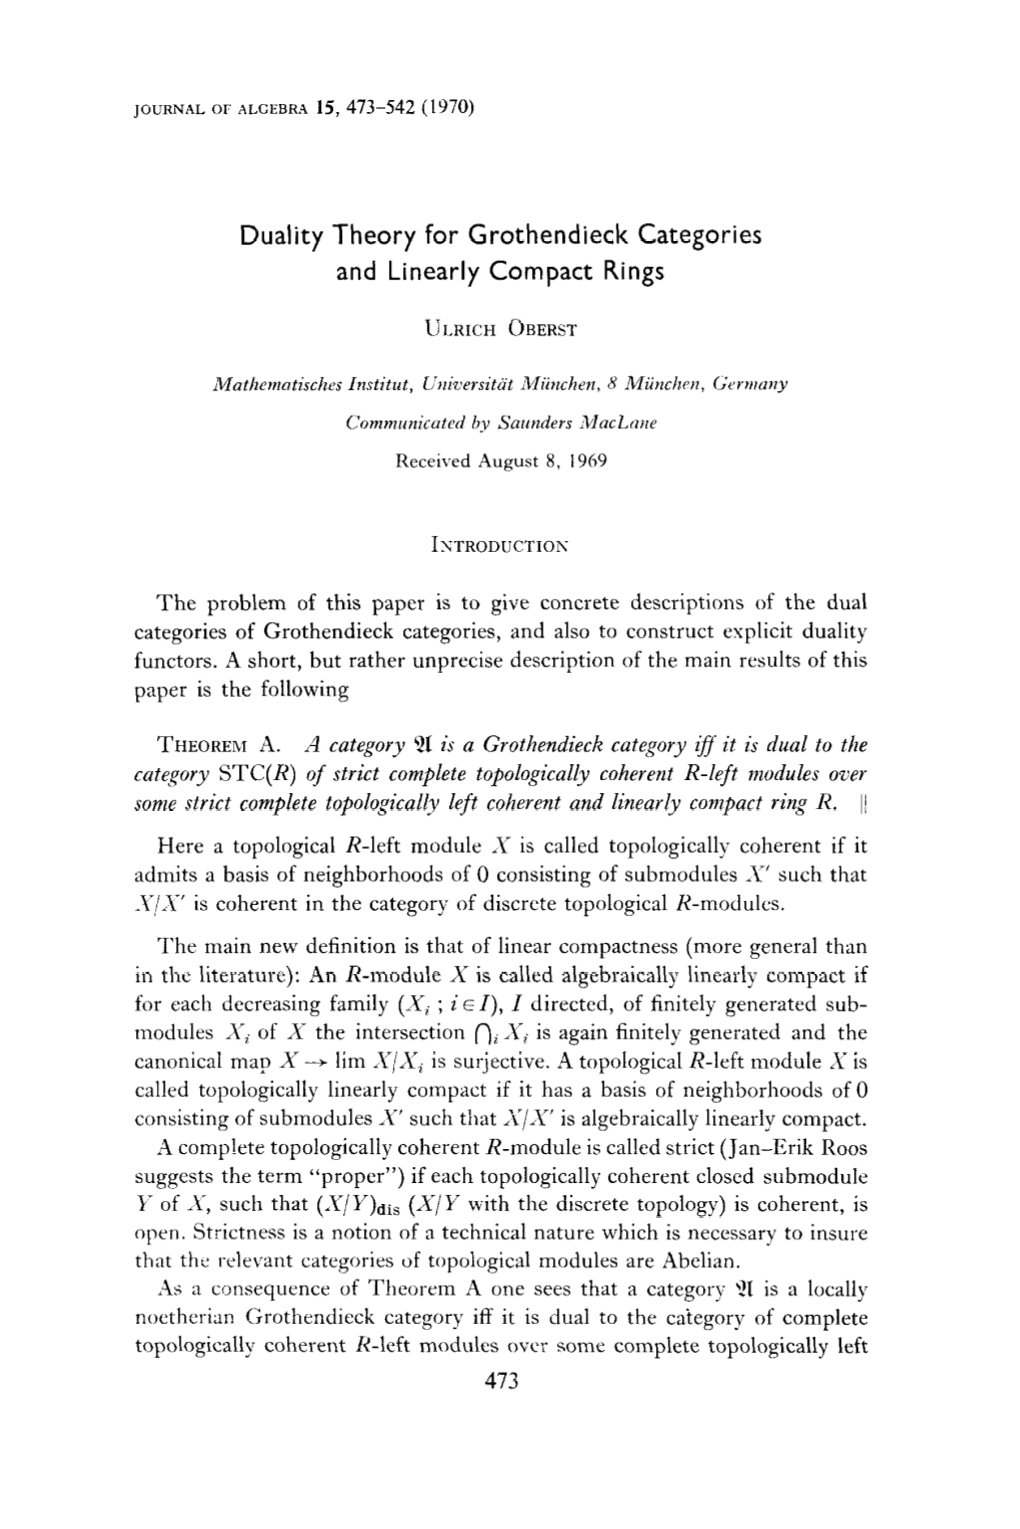 Duality Theory for Grothendieck Categories and Linearly Compact Rings